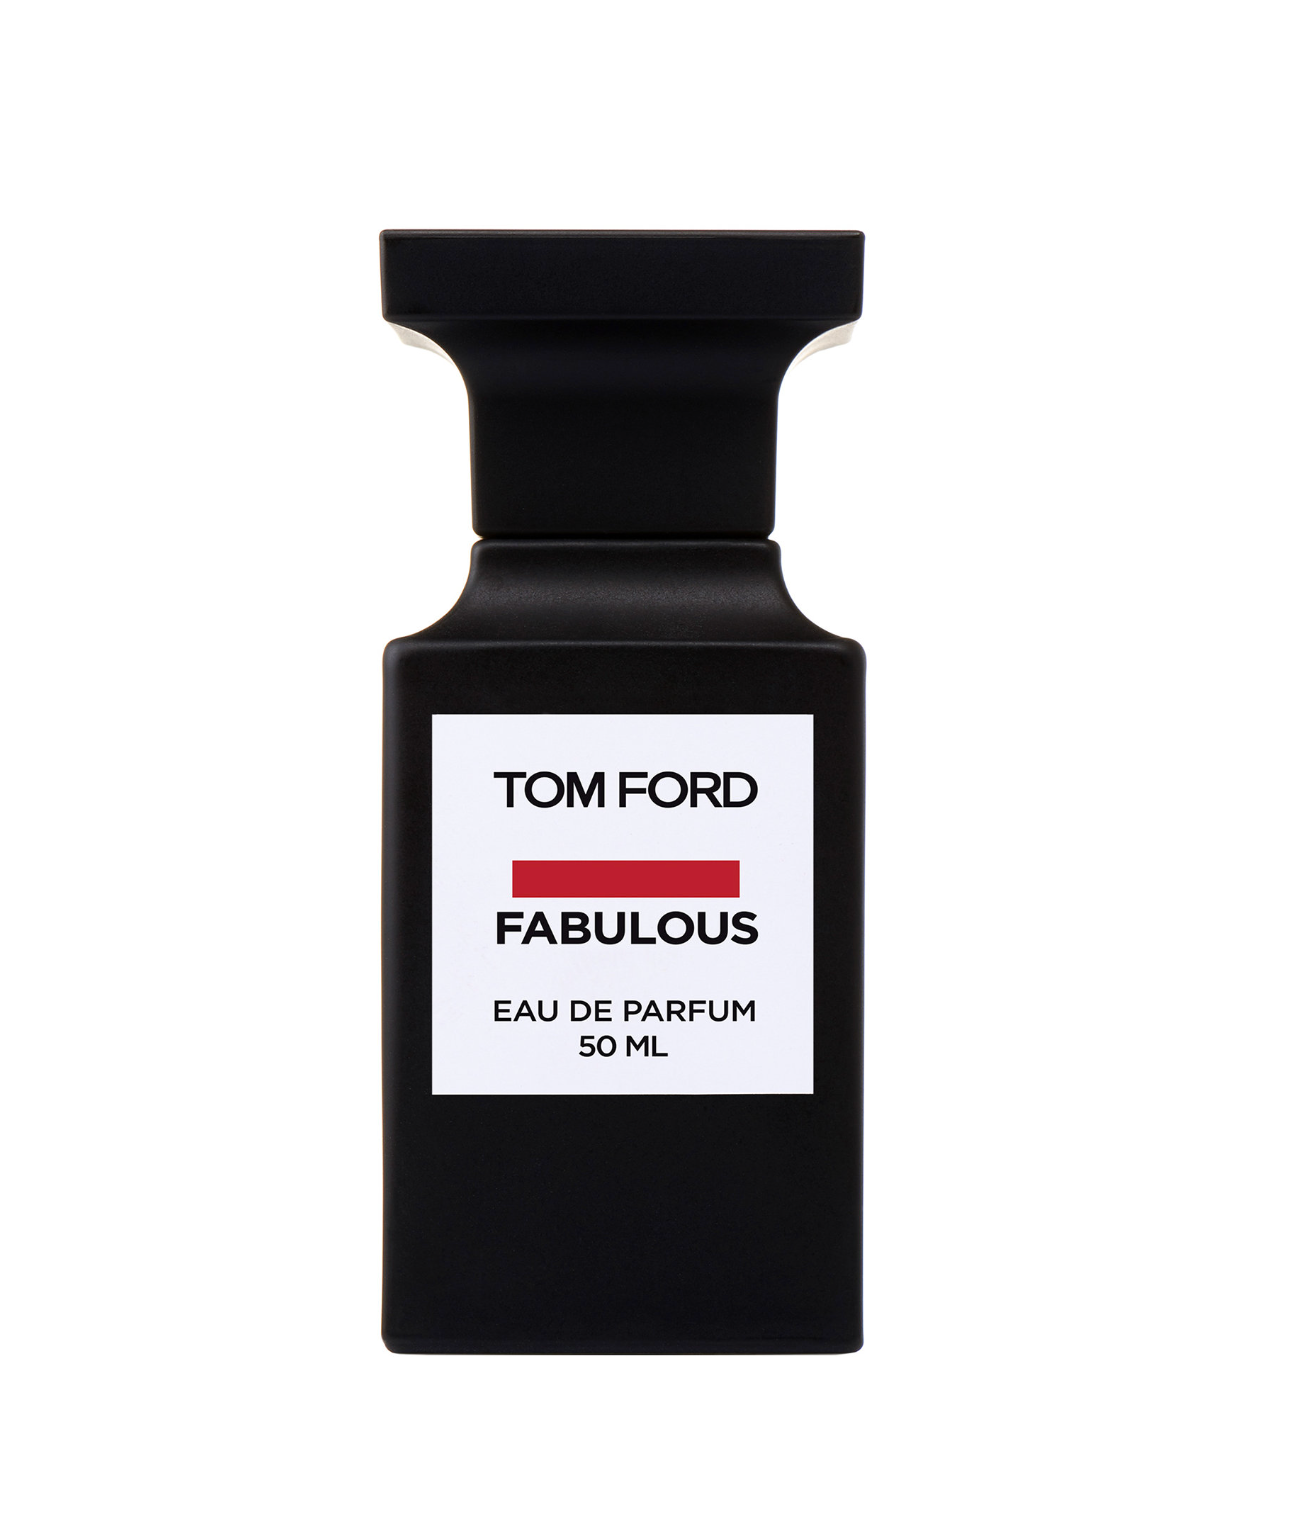 Tom Ford парфюмерная вода Fabulous, 50 мл